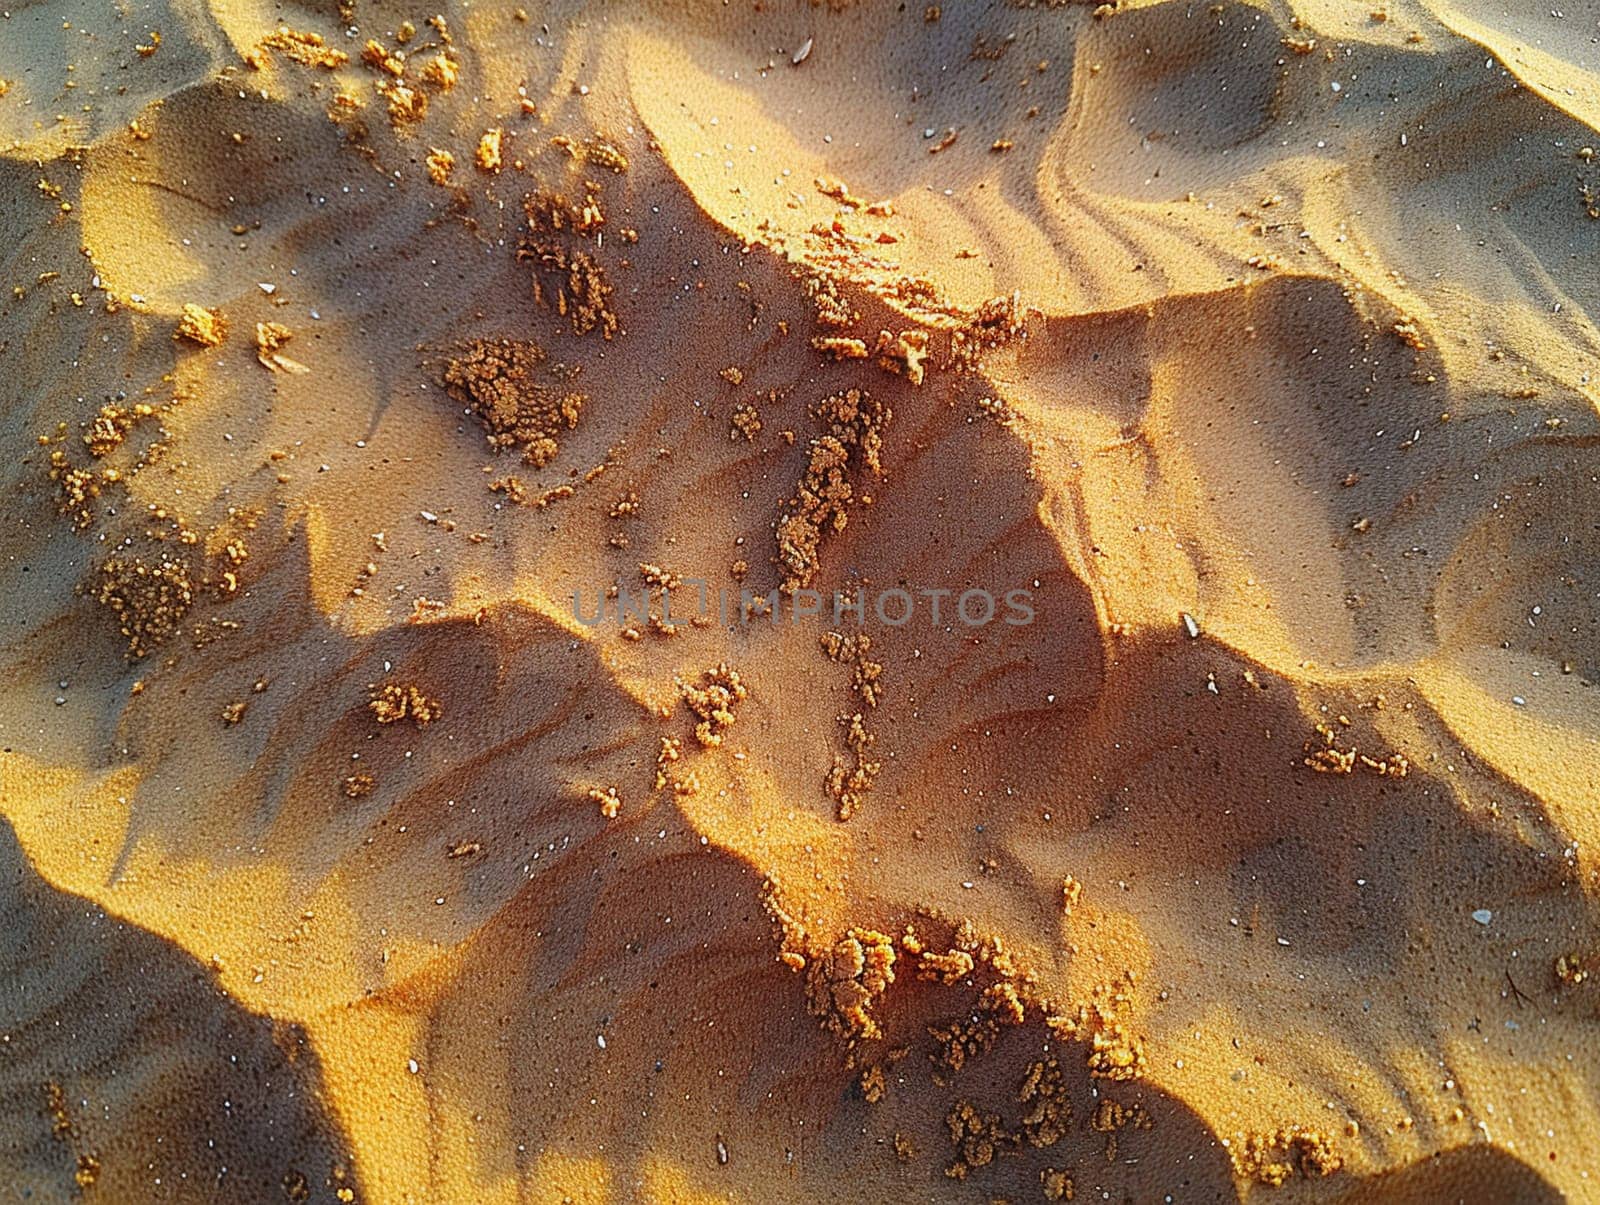 Warm desert sand patterns at sunset, perfect for natural and abstract backgrounds.